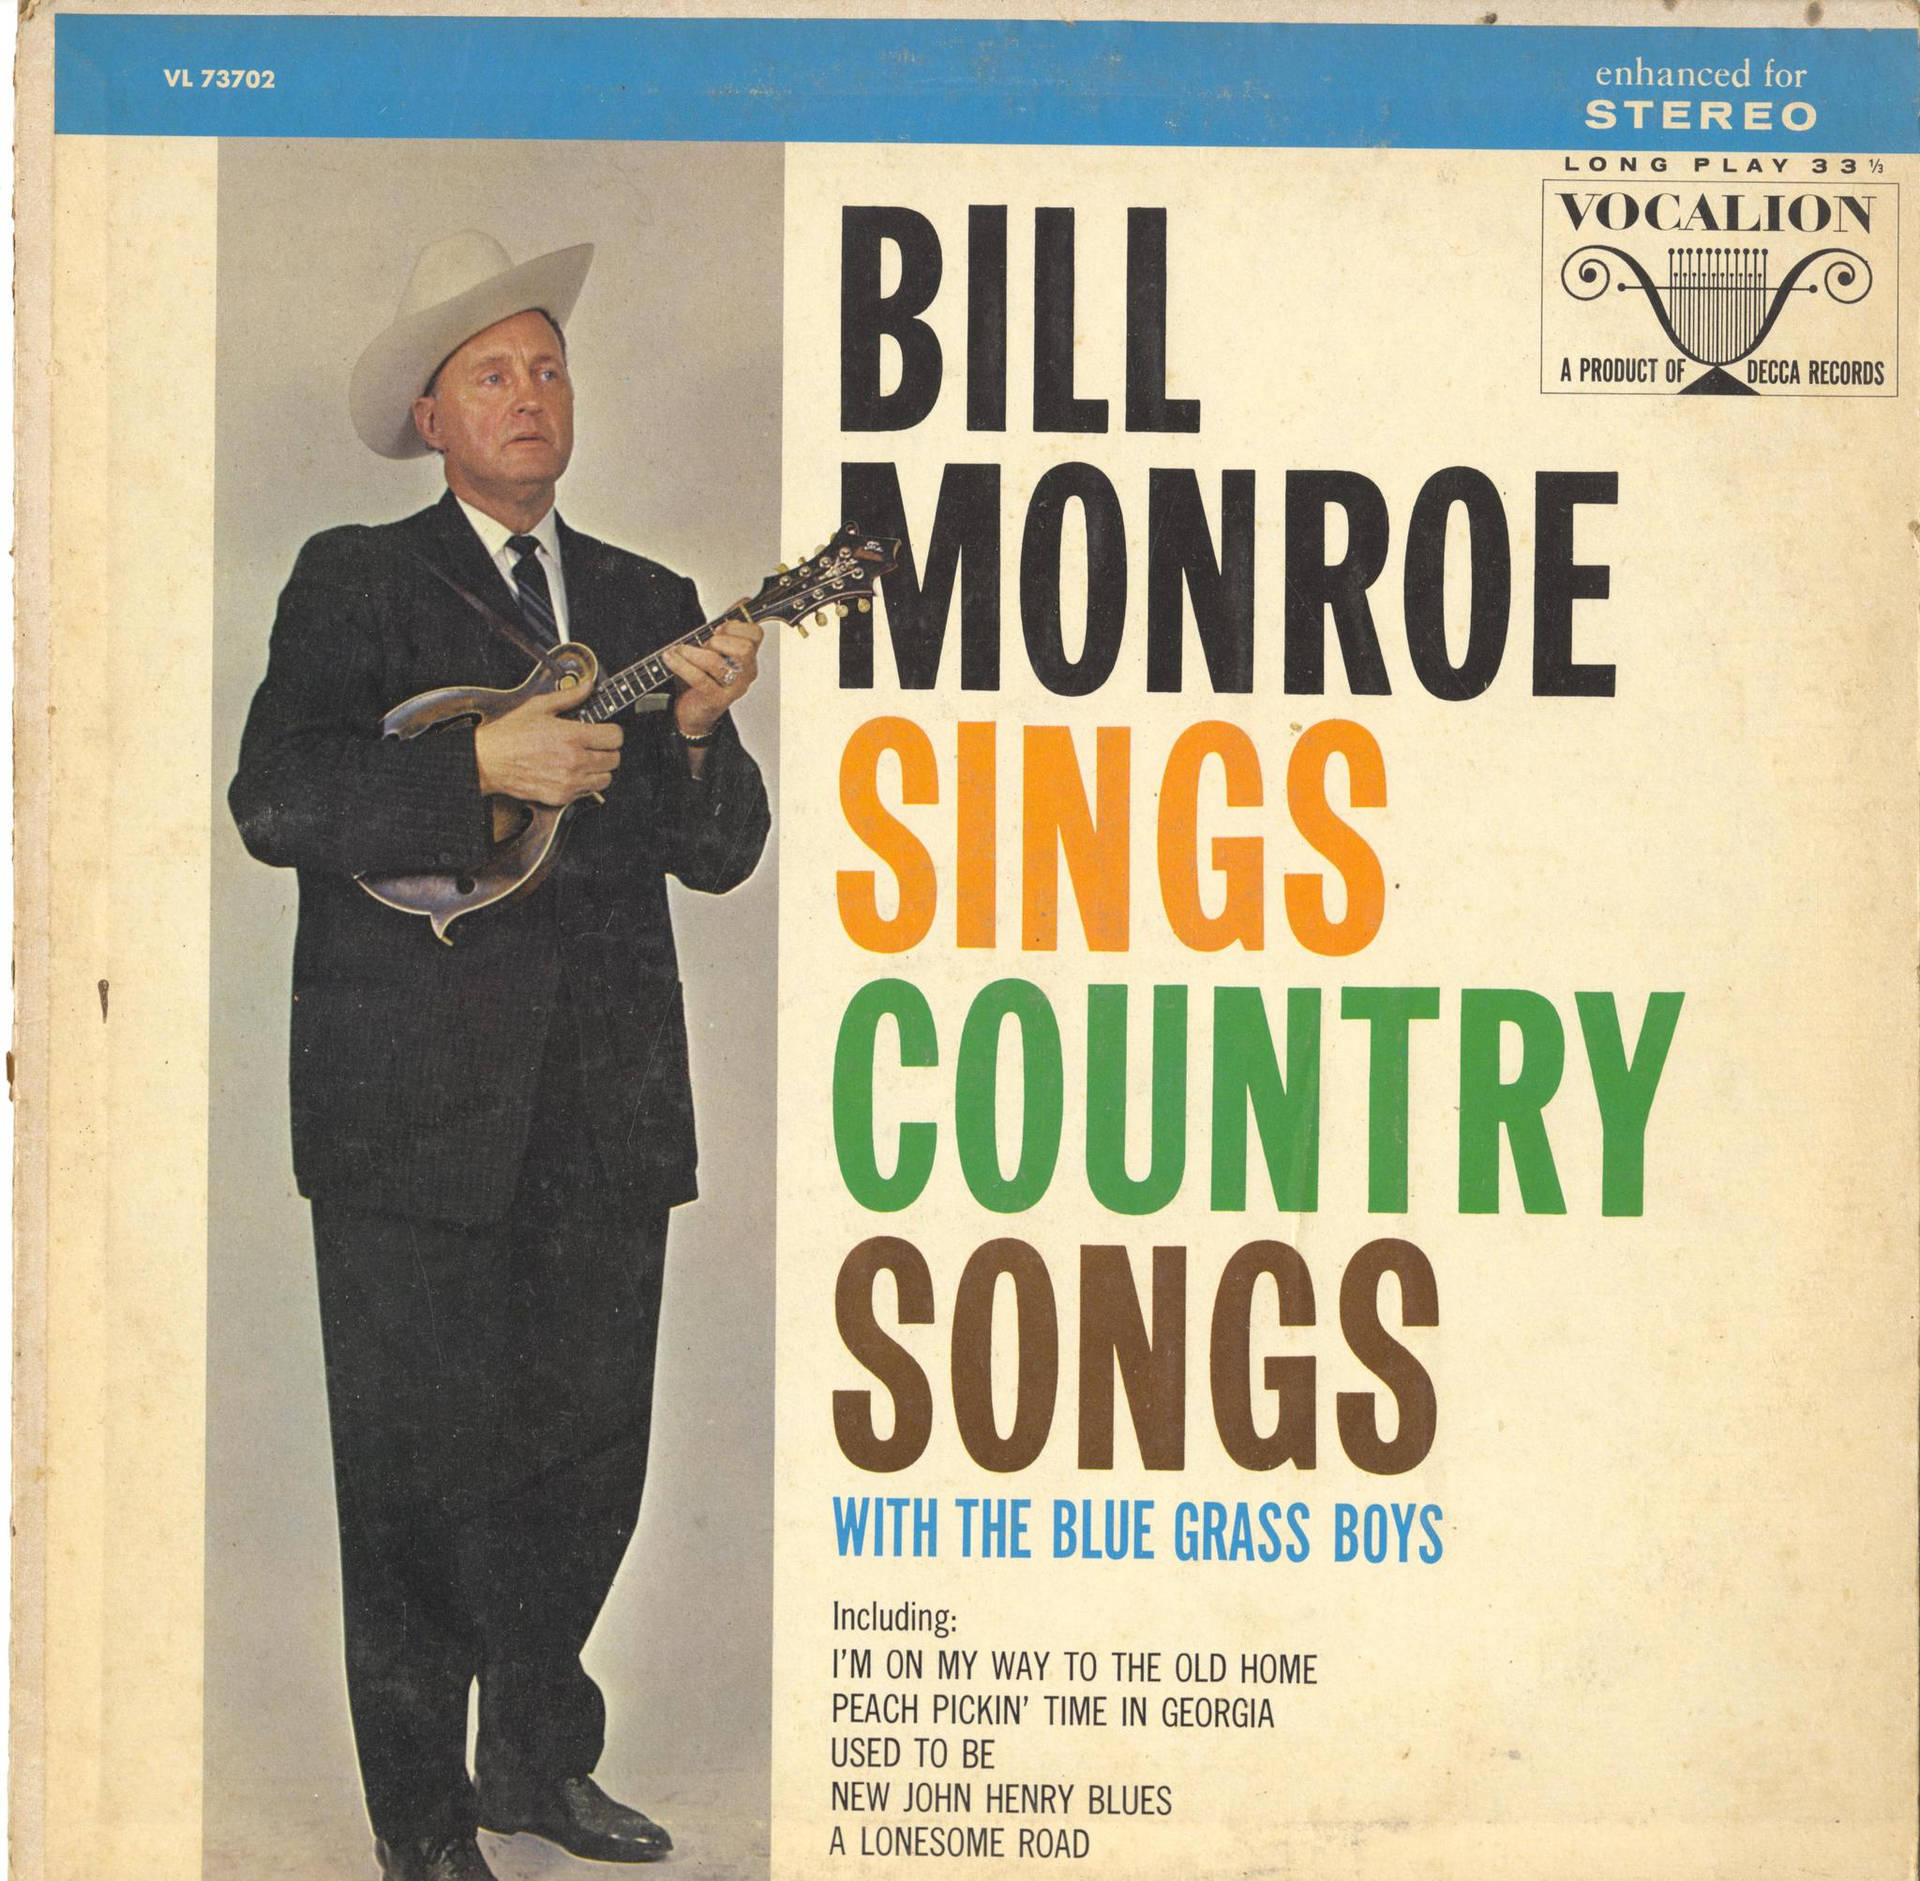 Bill Monroe Sings Country Songs With The Blue Grass Boys Wallpaper